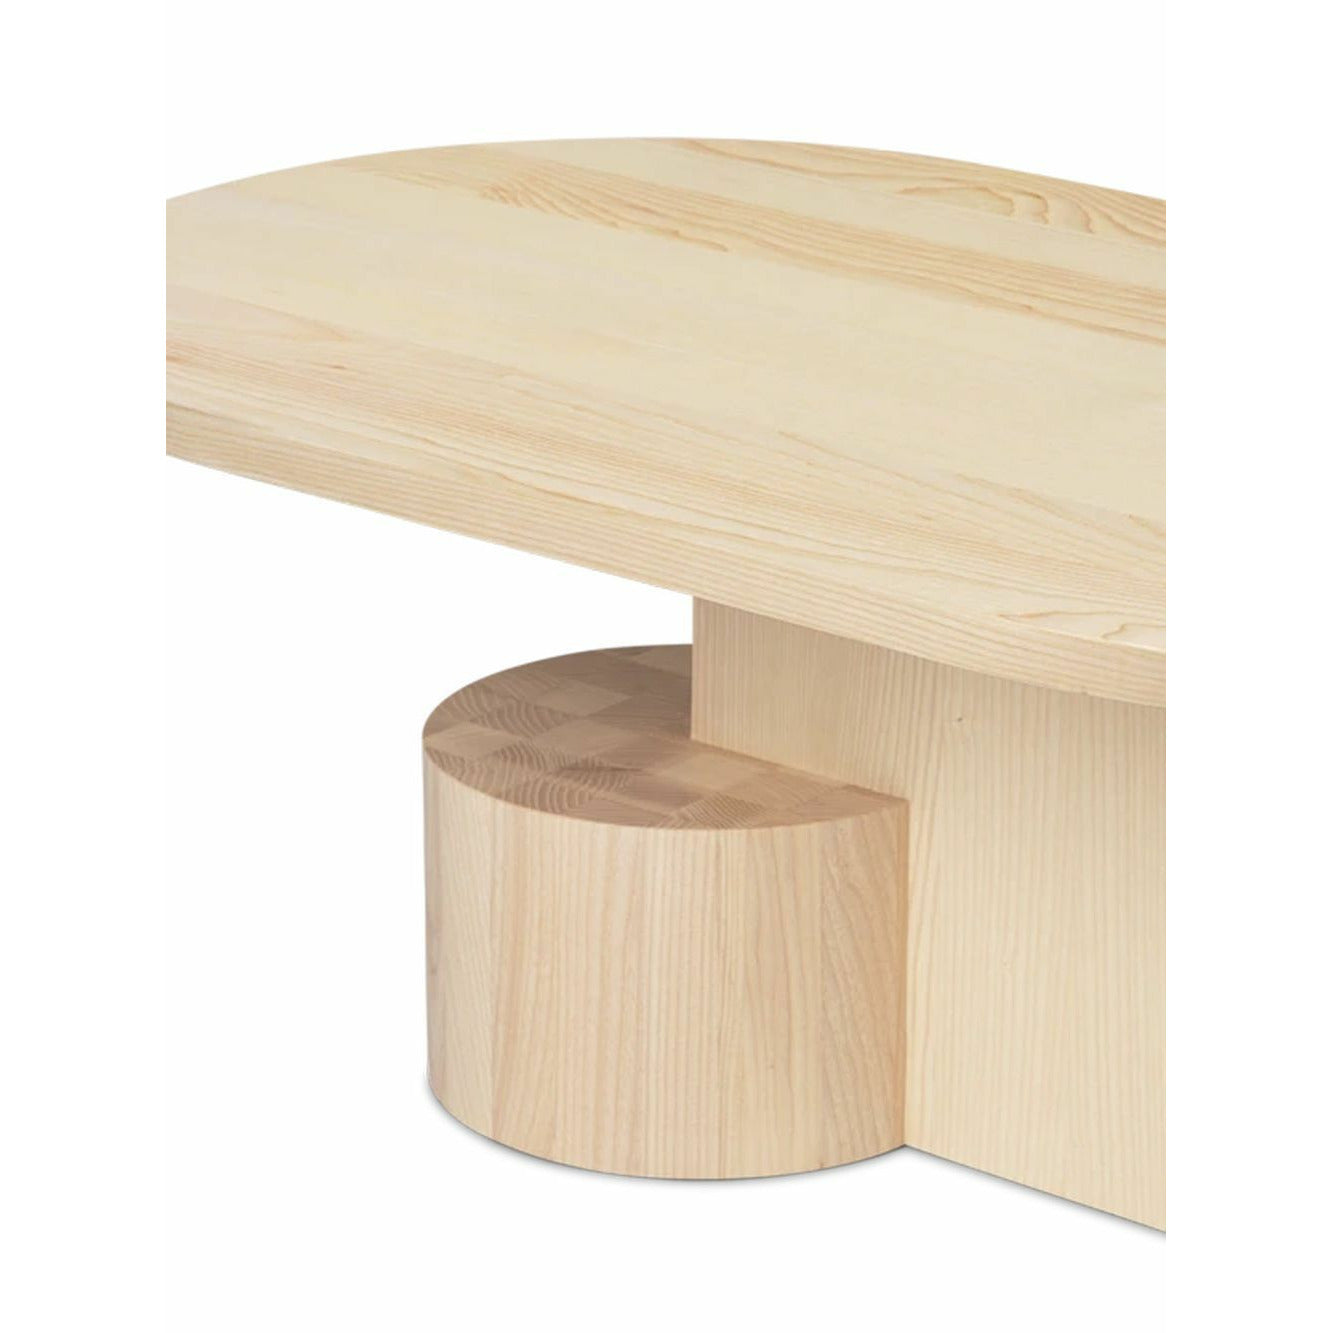 Ferm Living Insert Coffee Table, Natural Ash